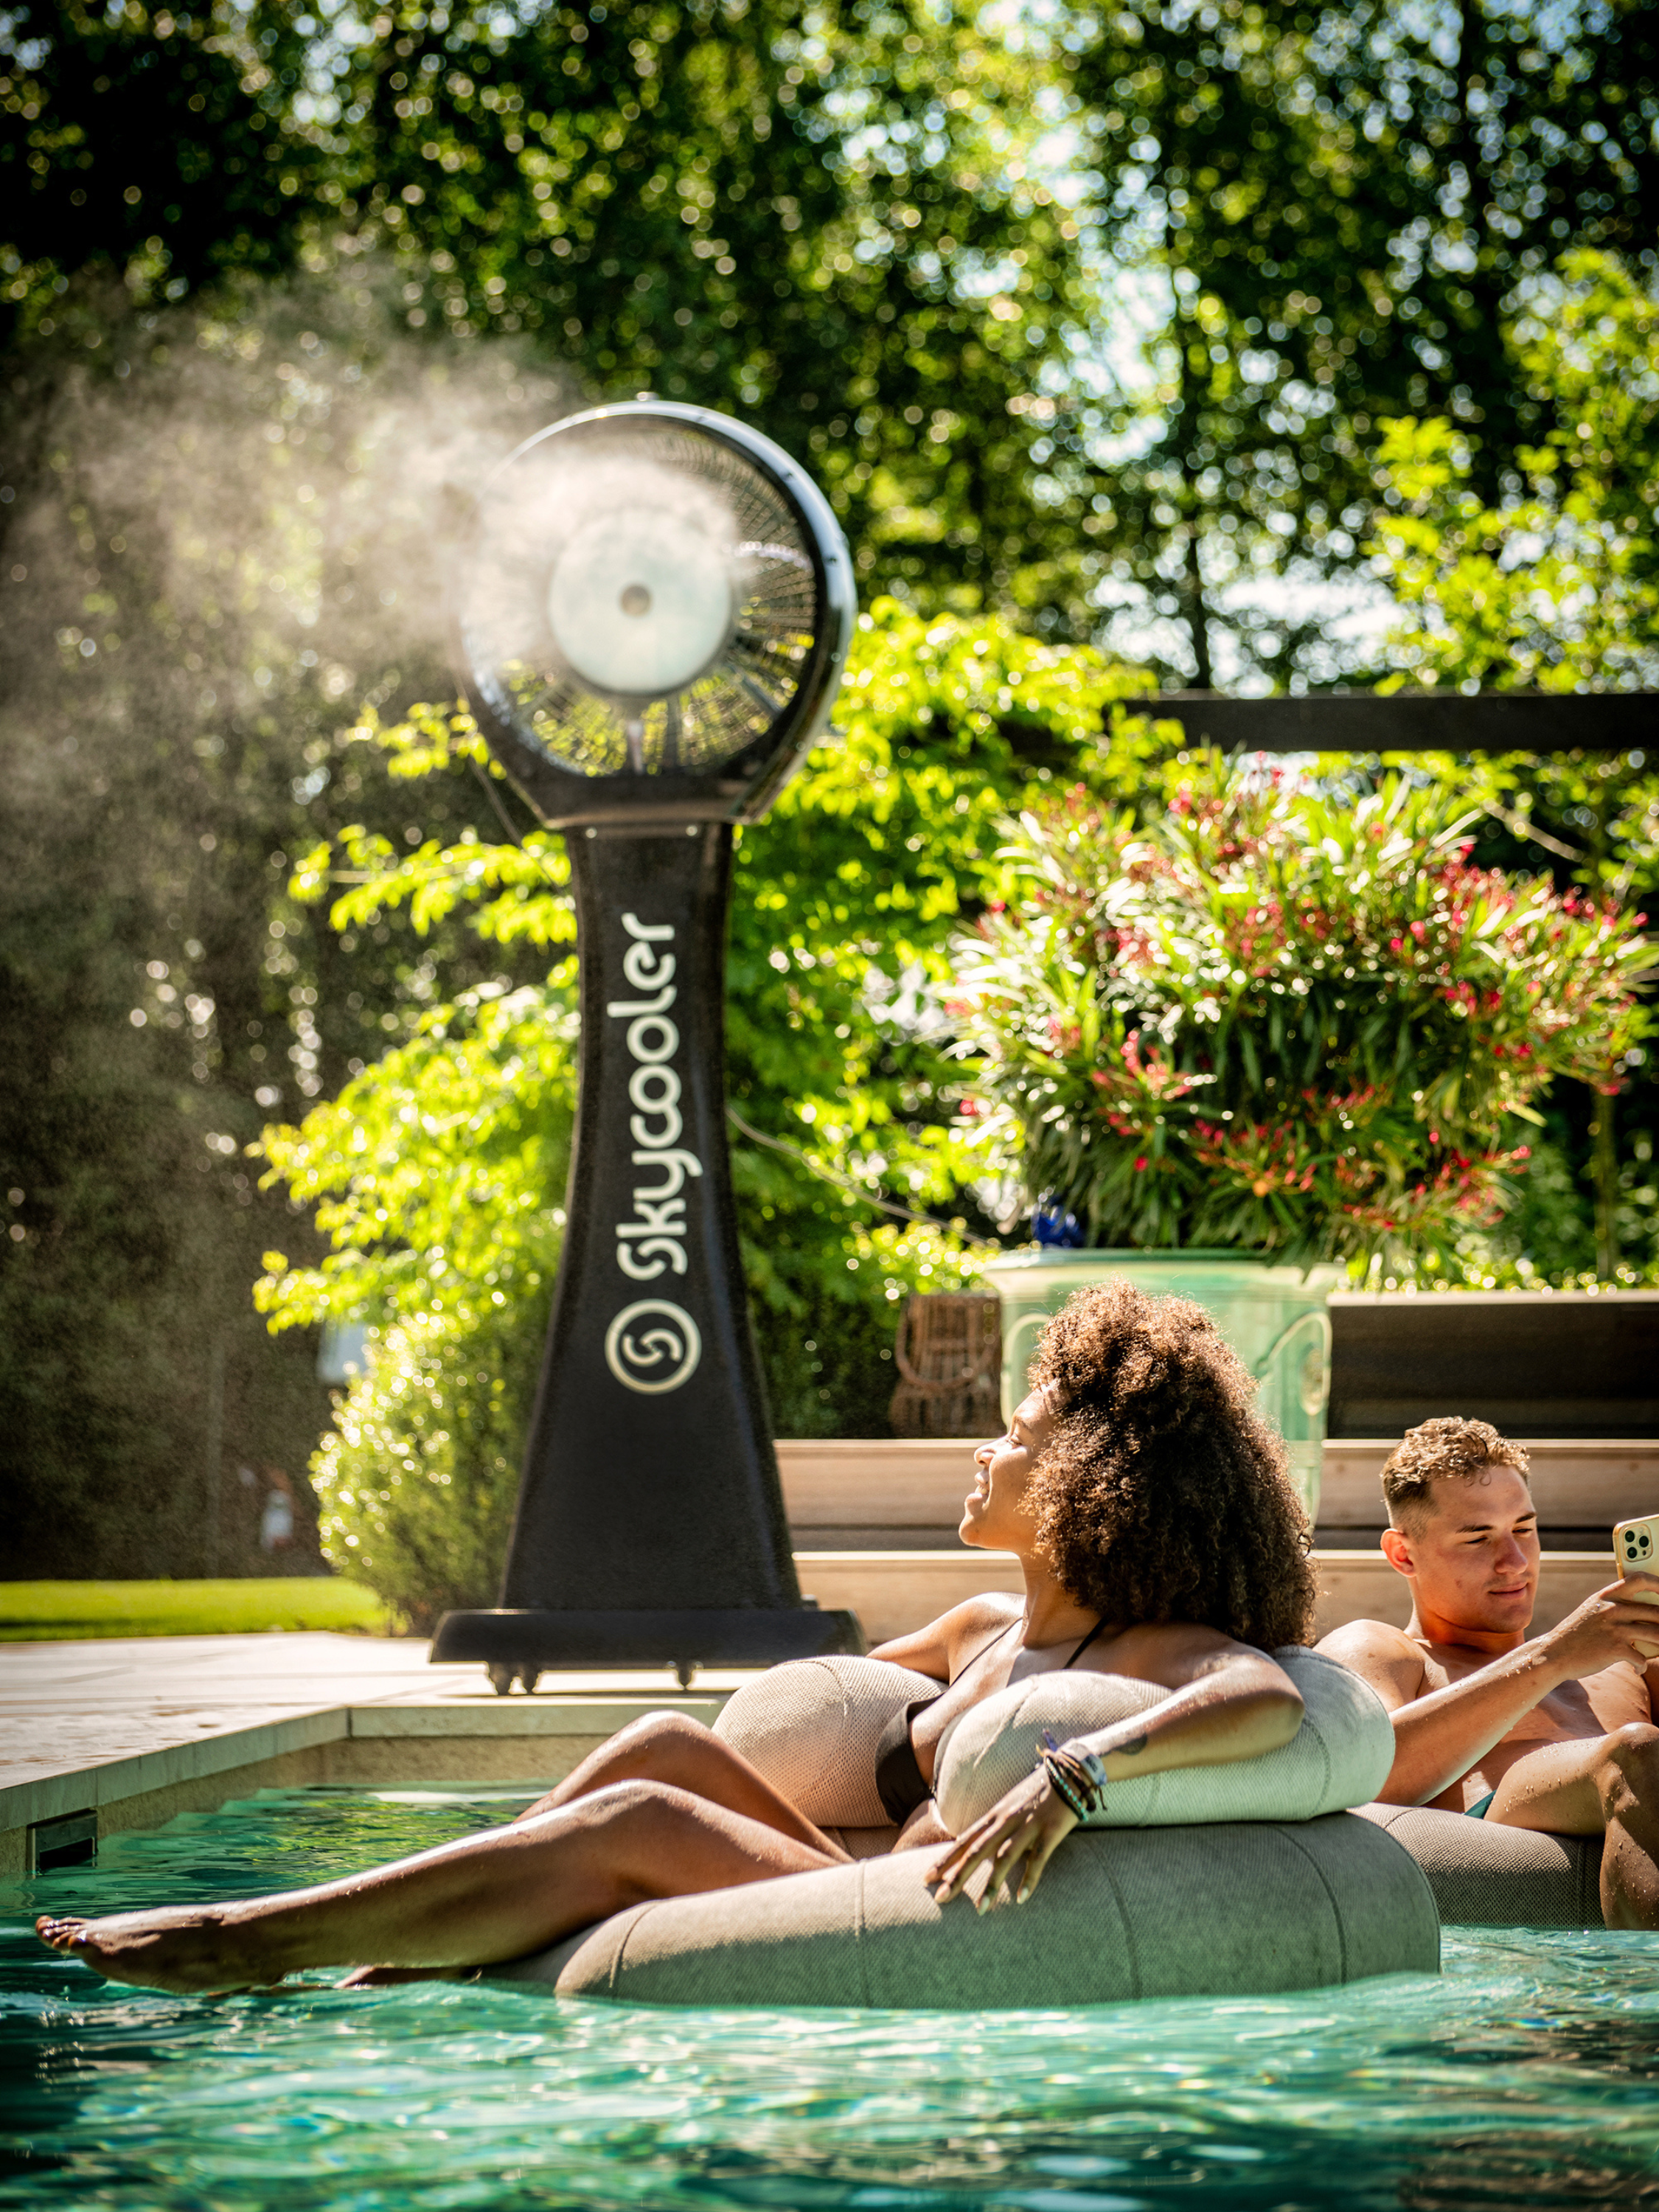 Stay Cool and Bug-Free with the Skycooler - Your Summer Must-Have